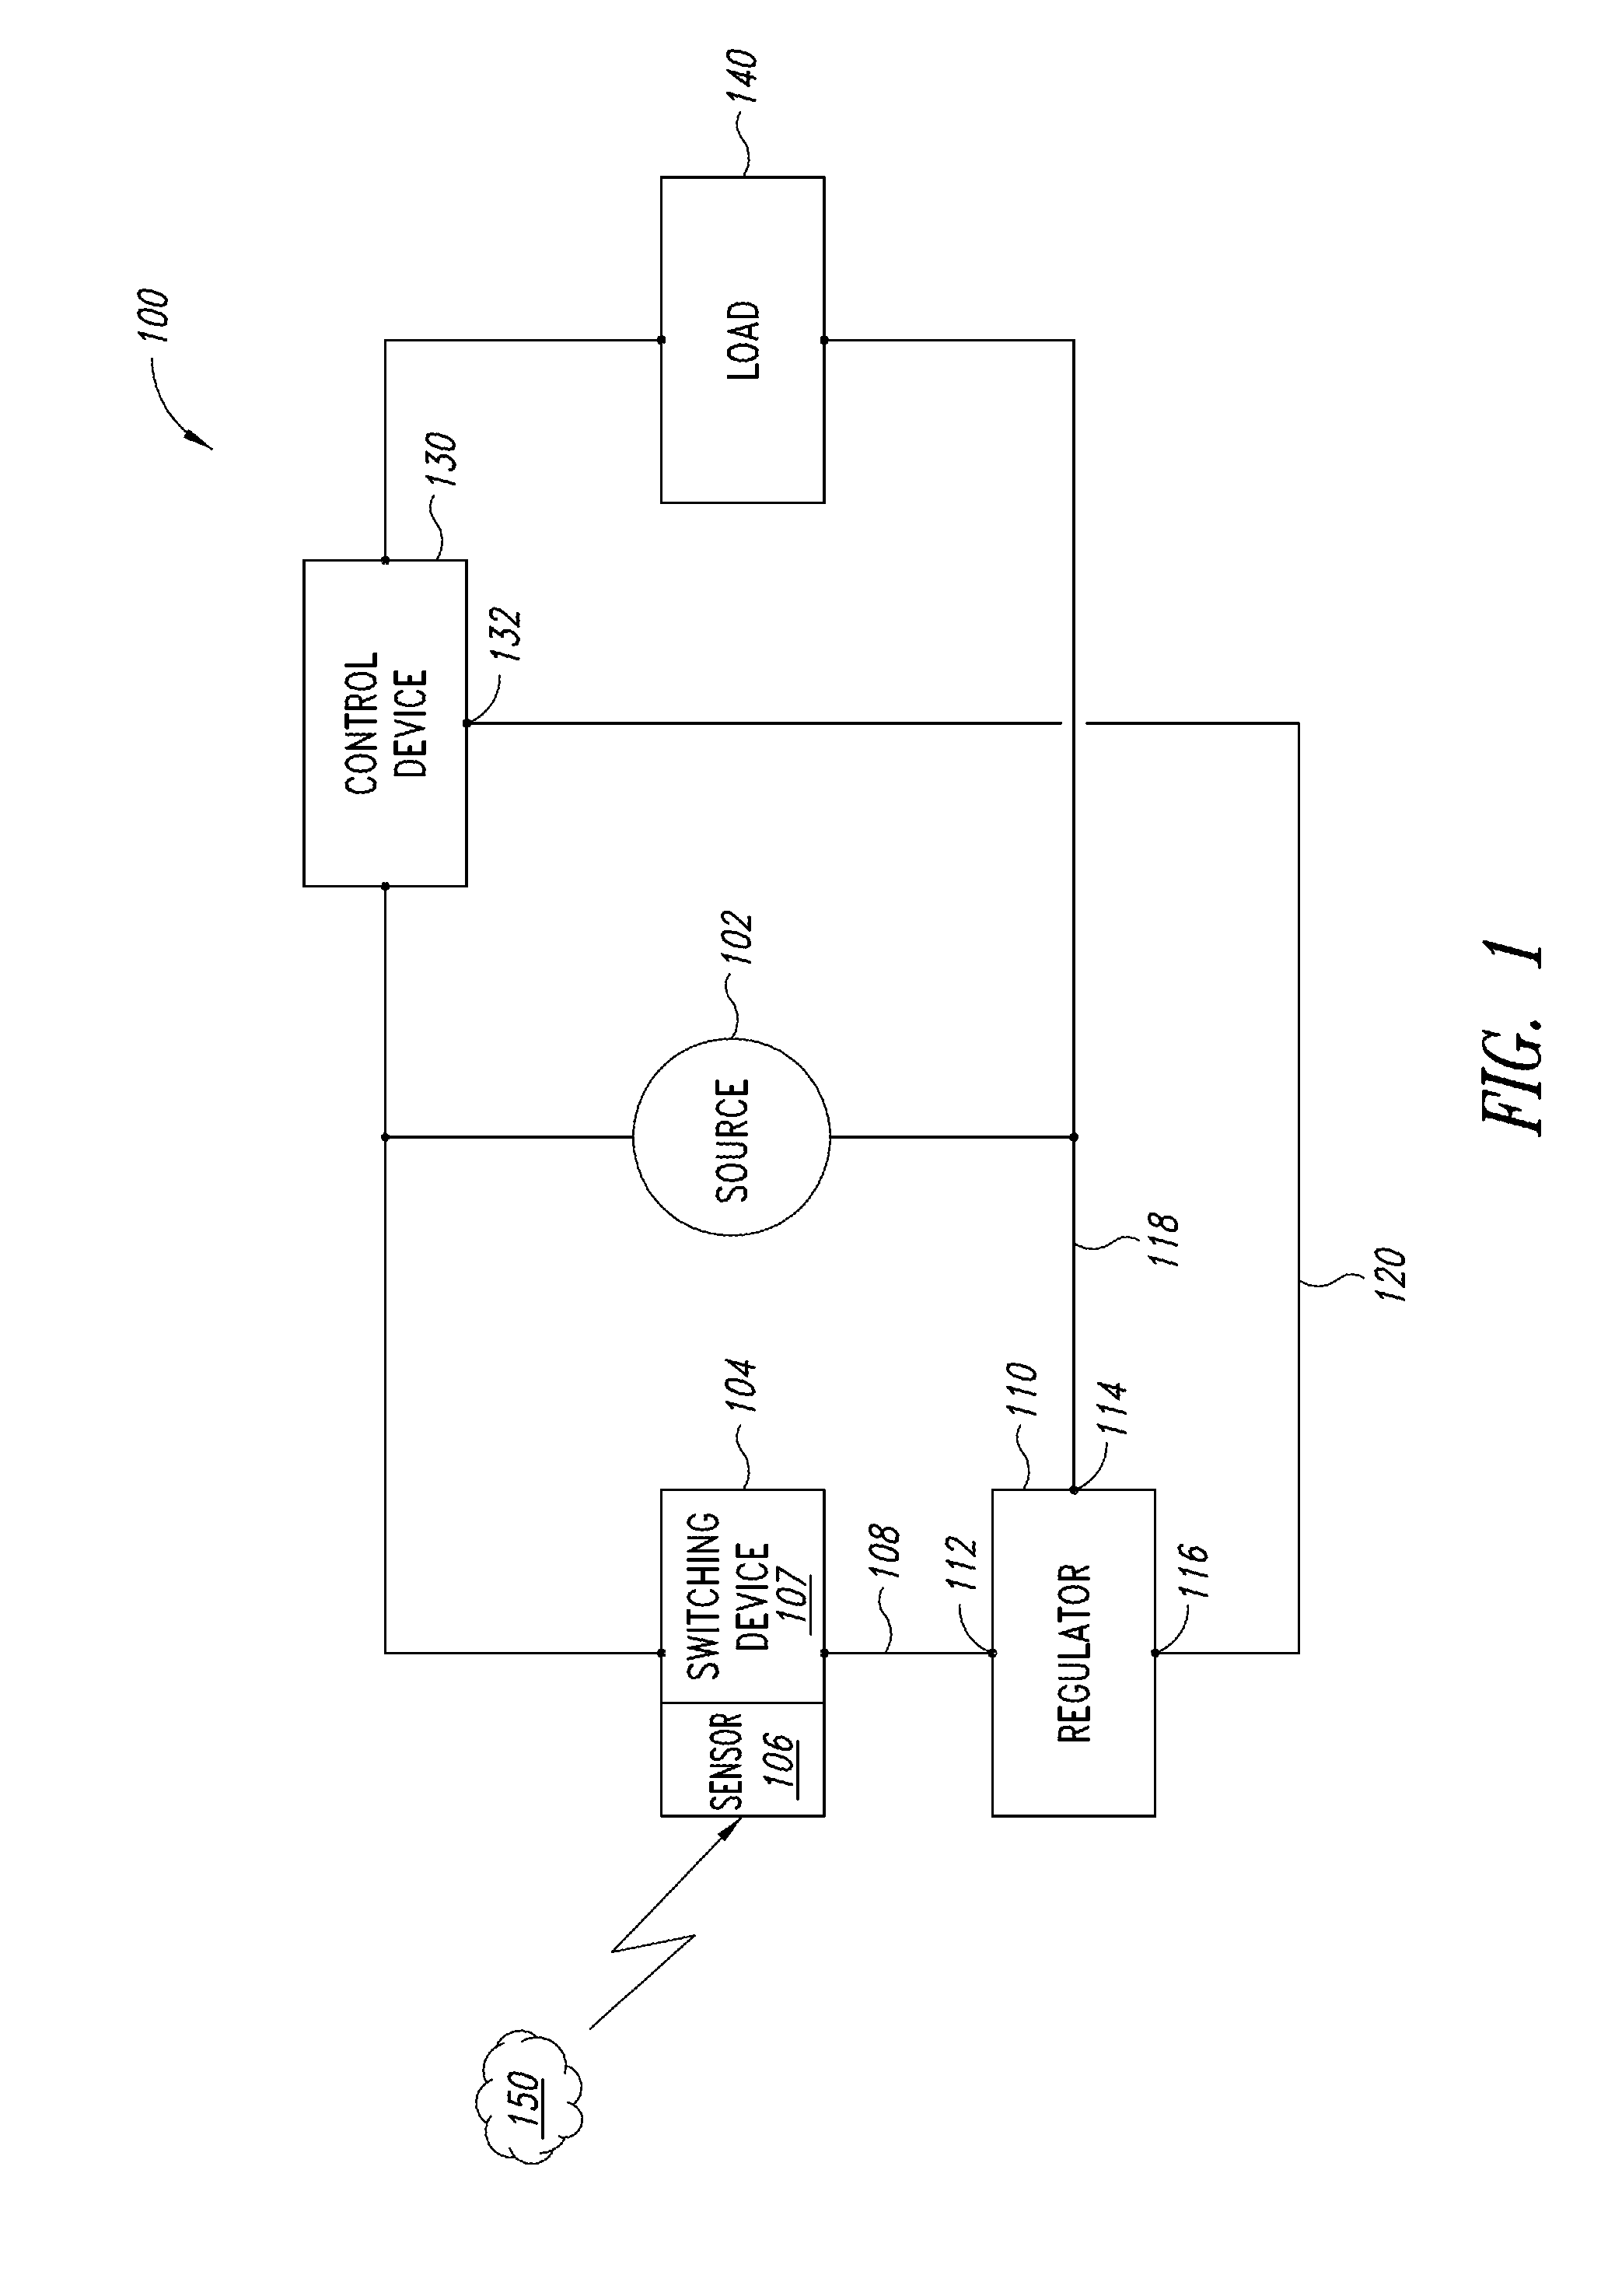 Systems, methods, and apparatuses for using a high current switching device as a logic level sensor